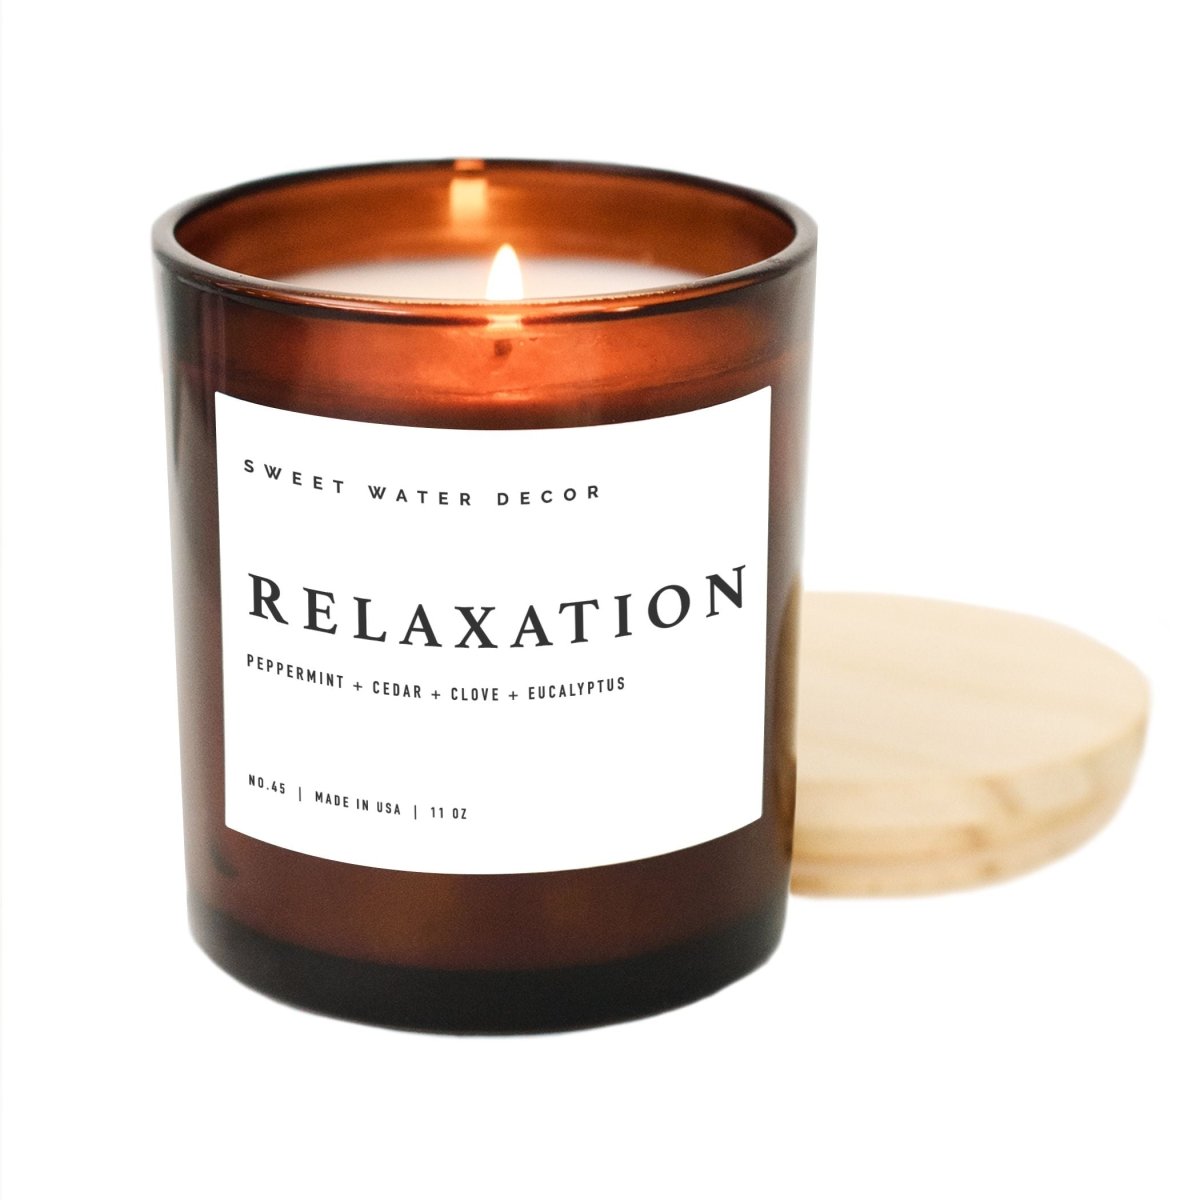 Sweet Water Decor Relaxation Soy Candle - Amber Jar - 11 oz - lily & onyx